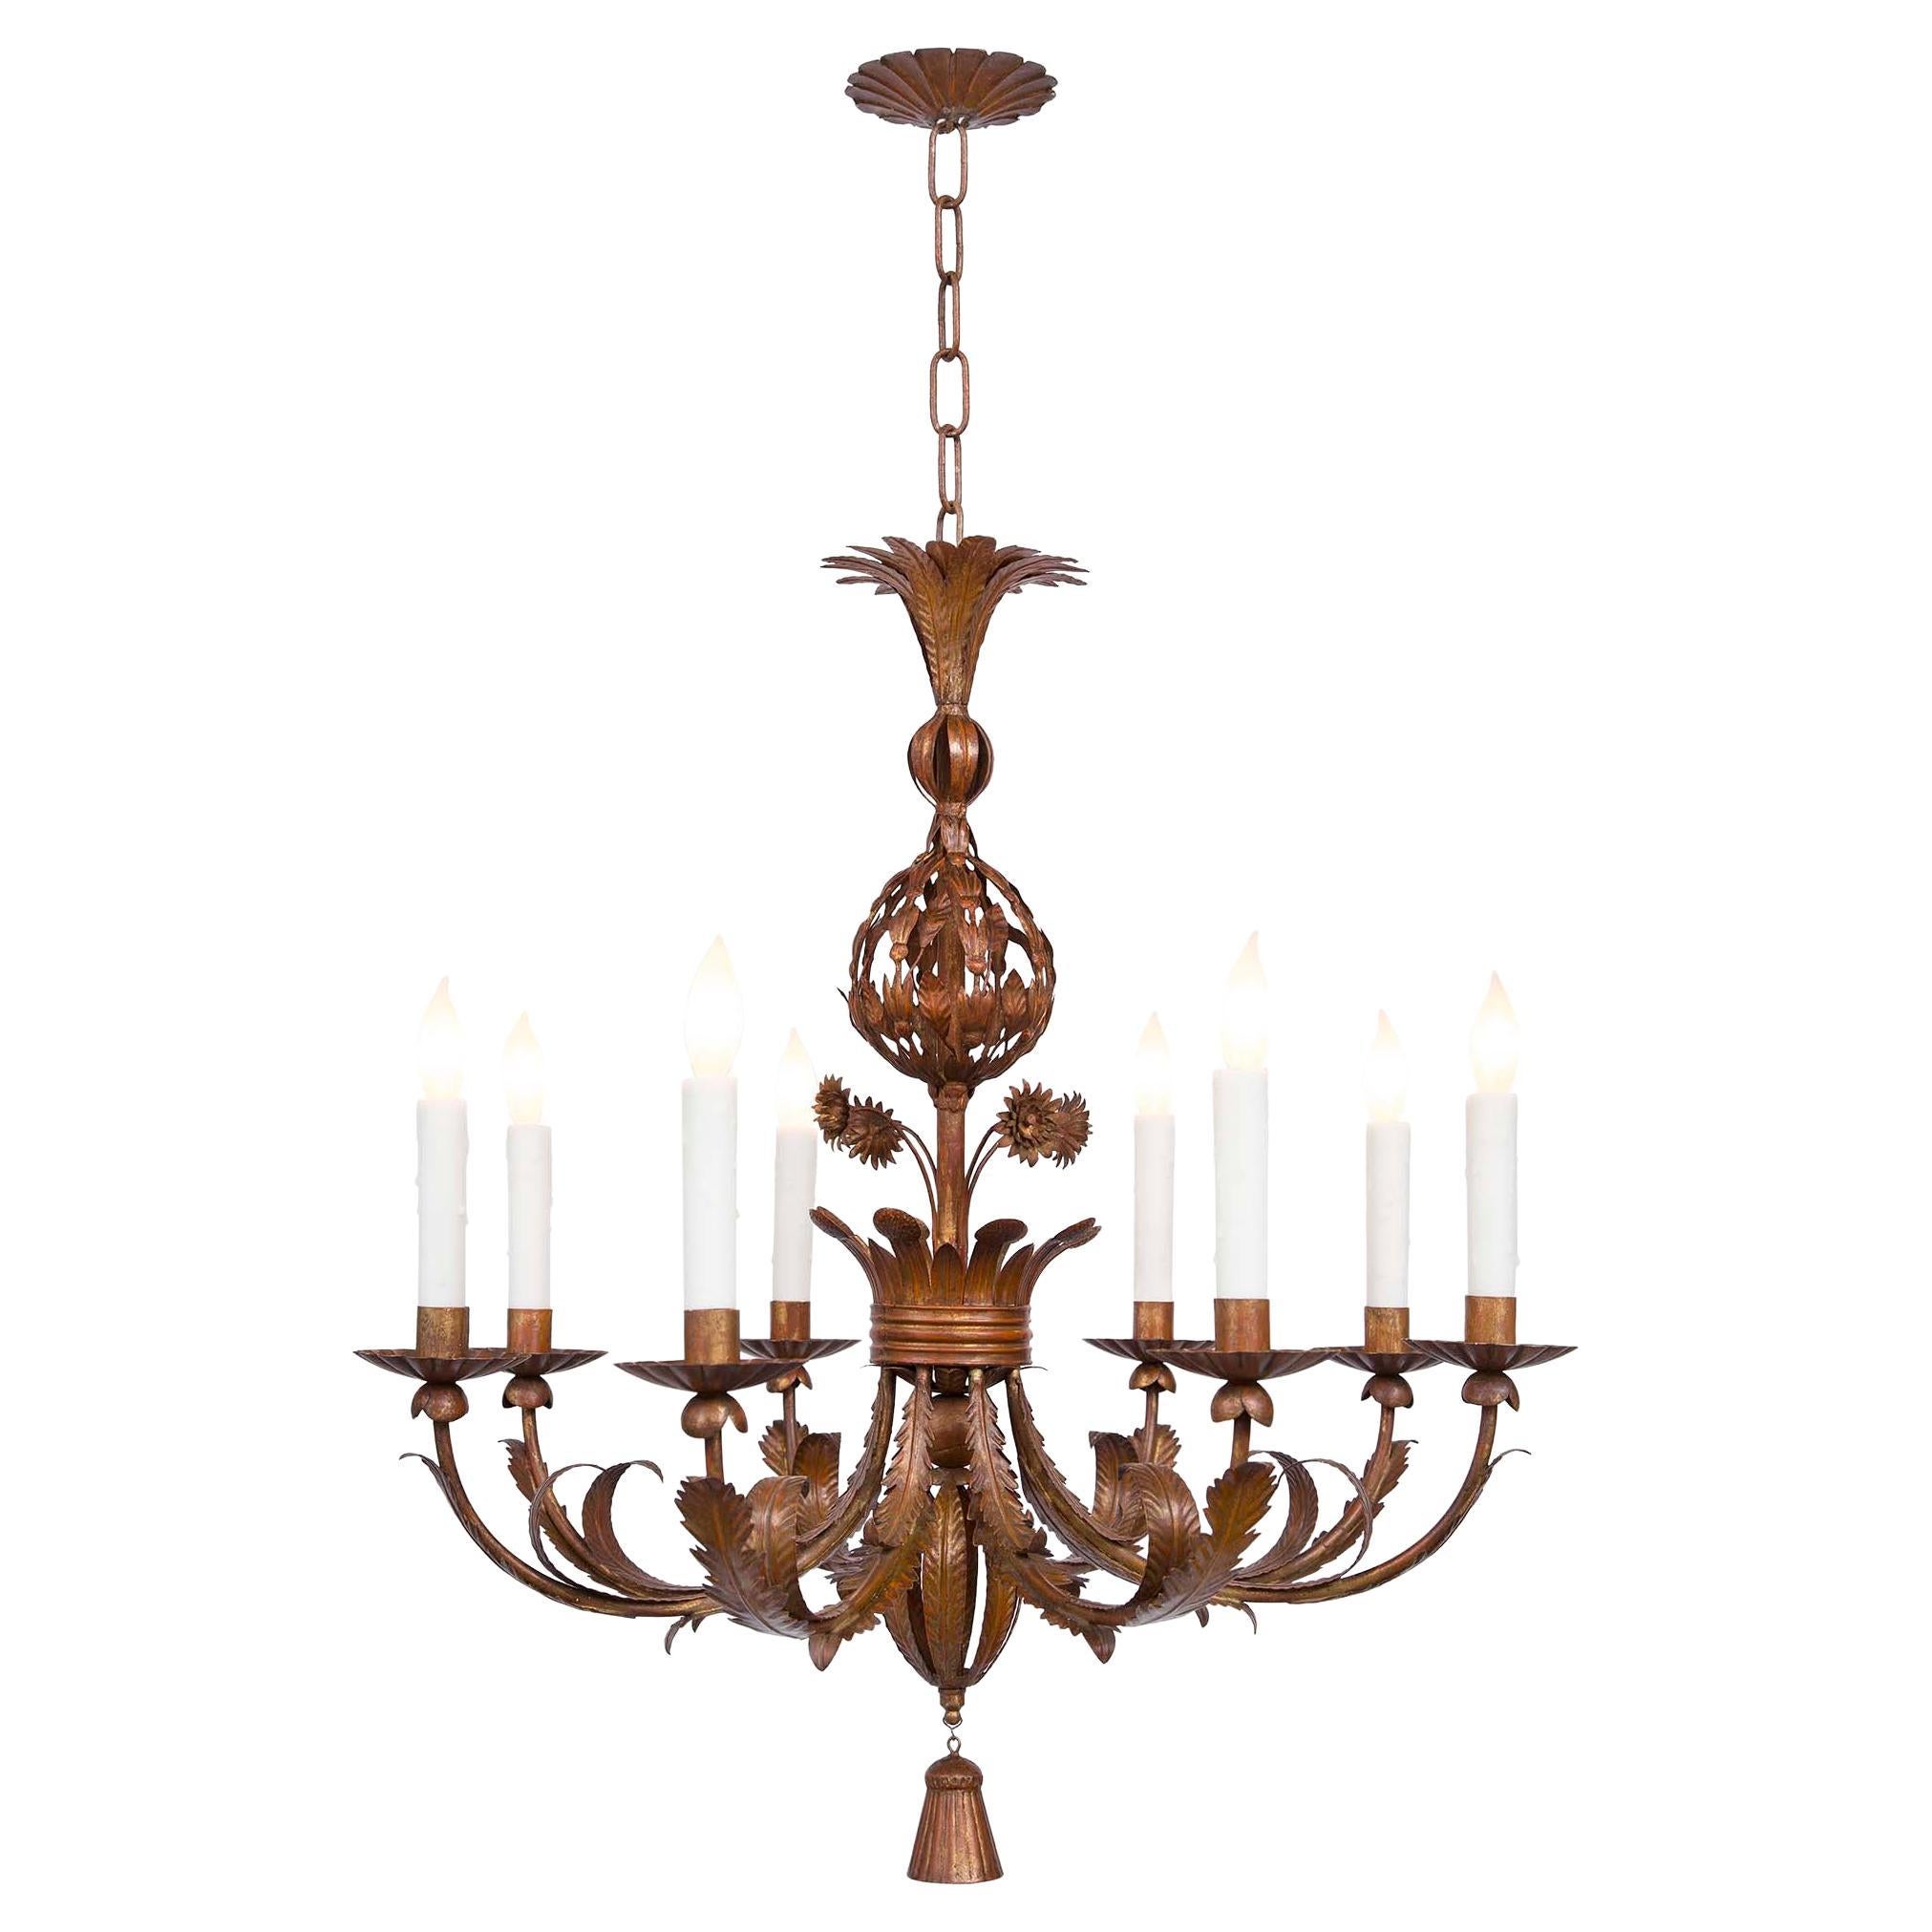 Italian Turn of the Century Pressed Metal Eight-Arm Chandelier For Sale